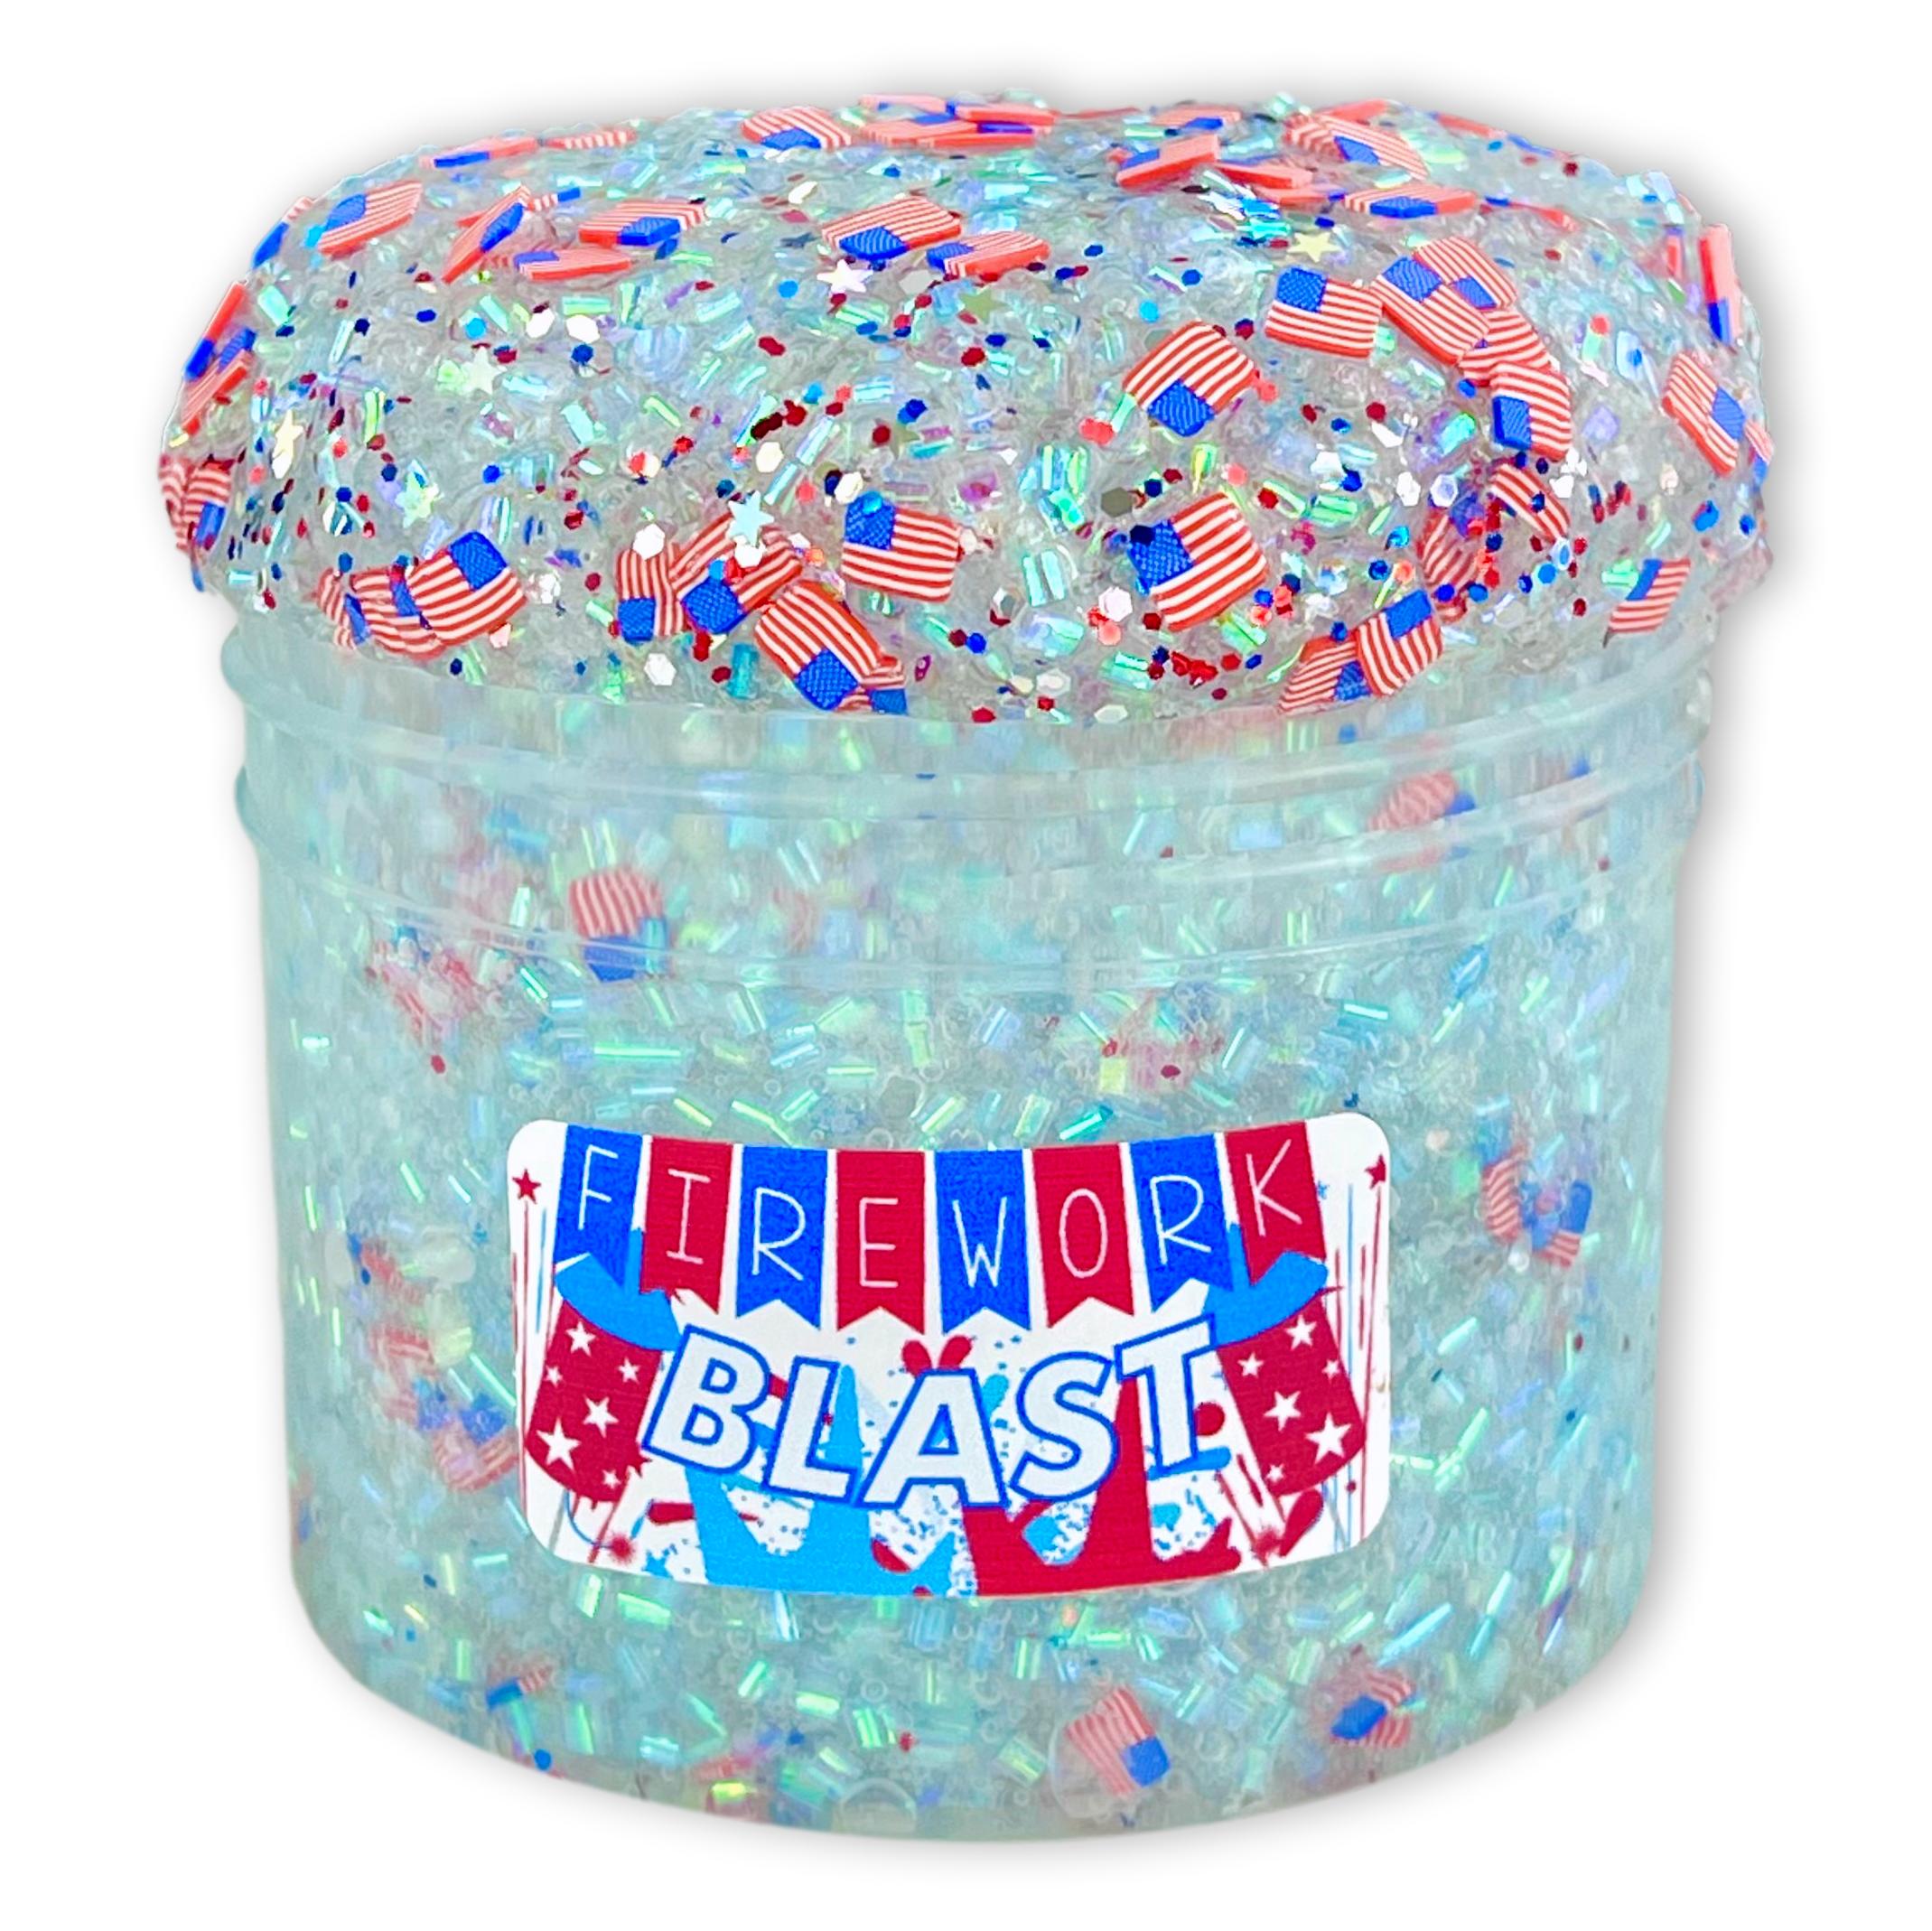 Wholesale Slime Storage Containers And Foam Ball Storage